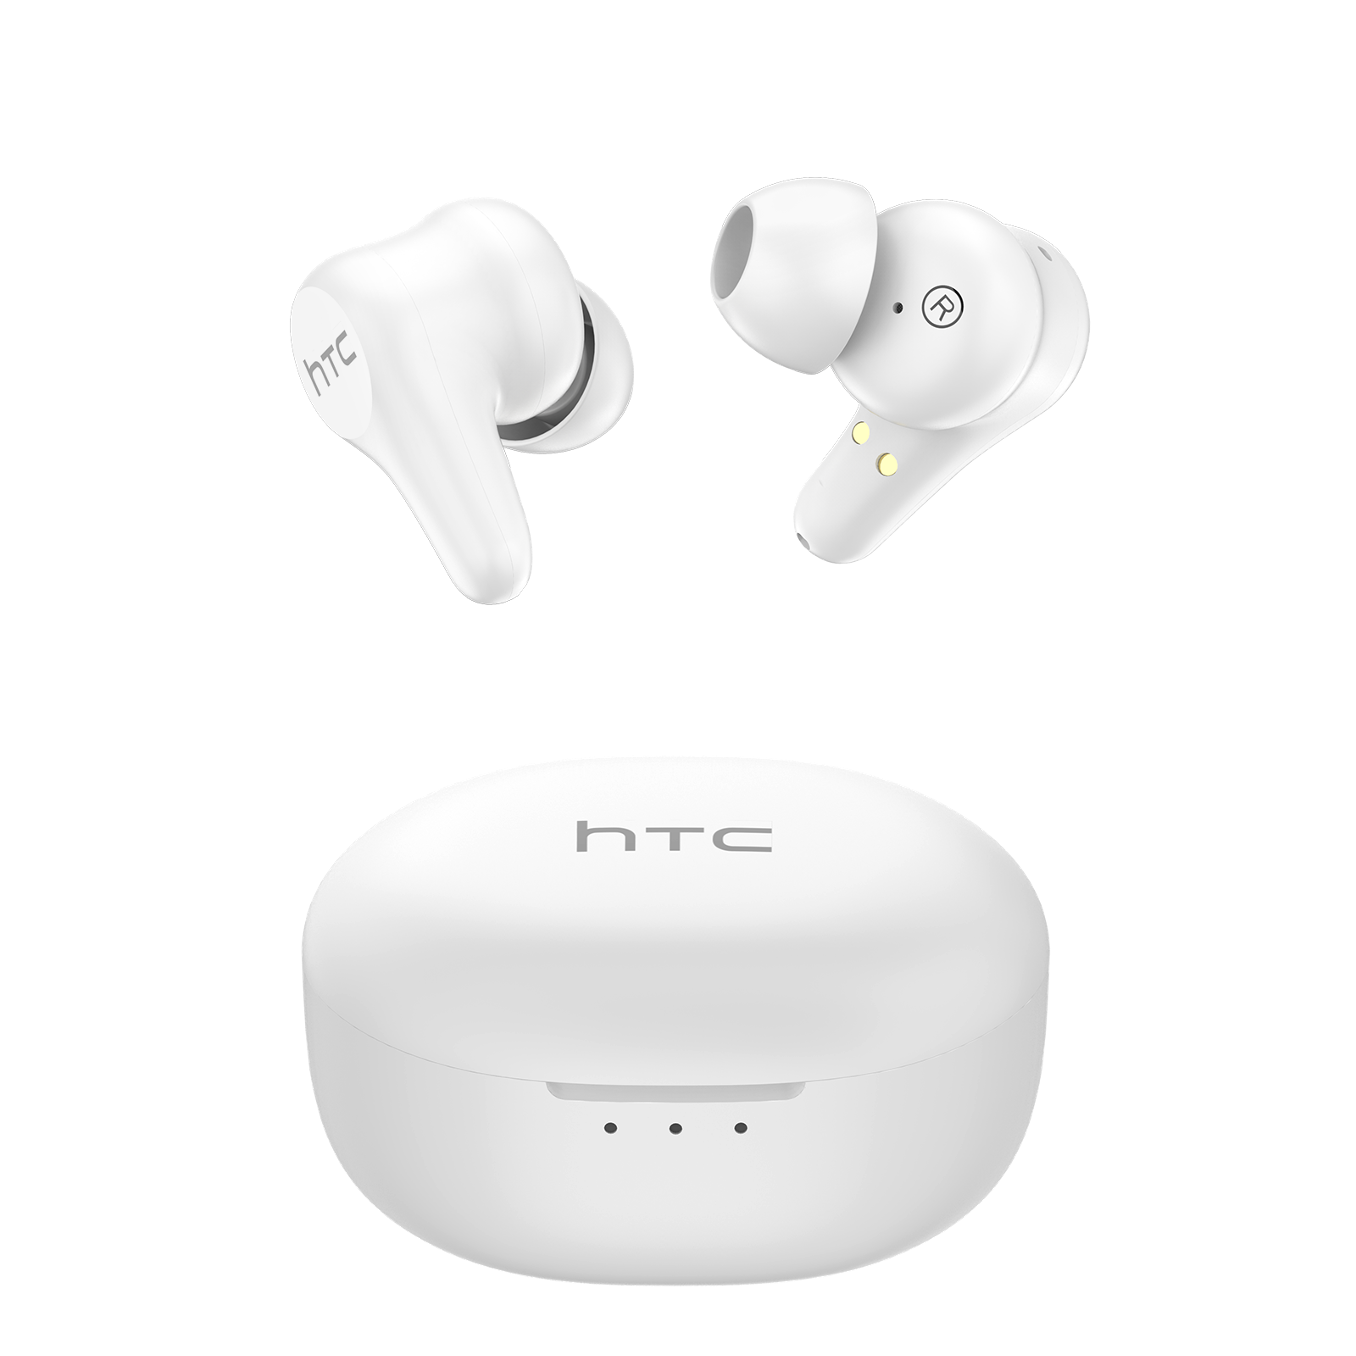 HTC True Wireless Earbuds Plus white earbuds and case reverse